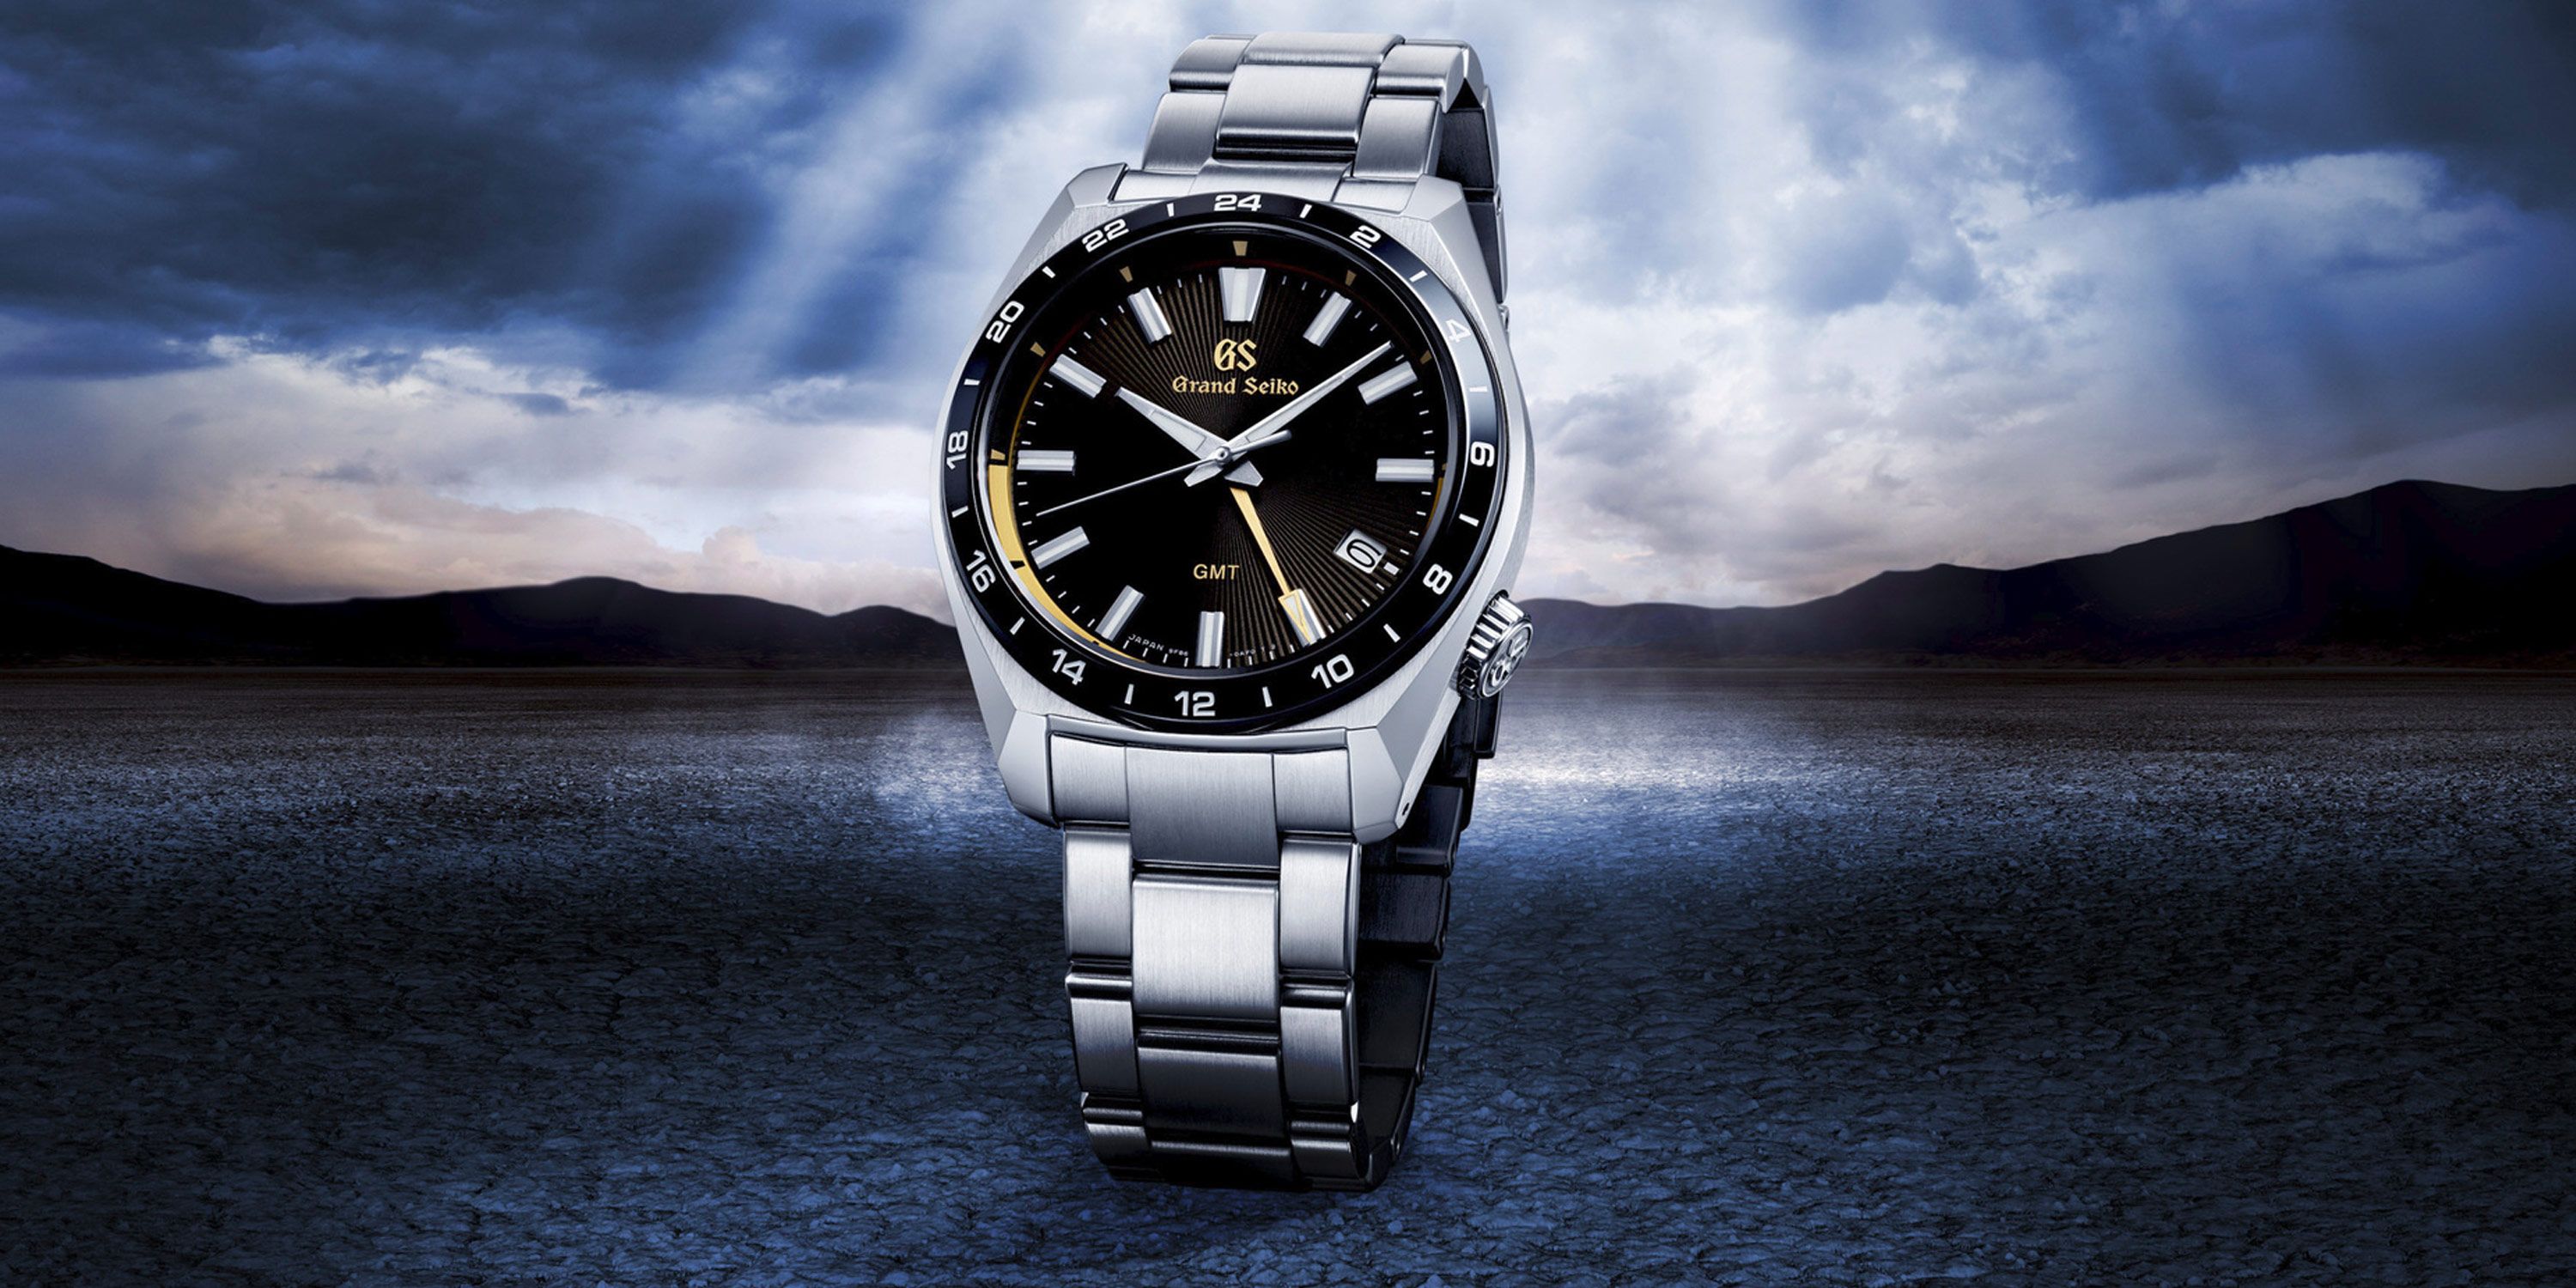 It's Quartz, Yes, but This Grand Seiko Is No Cheap GMT Watch